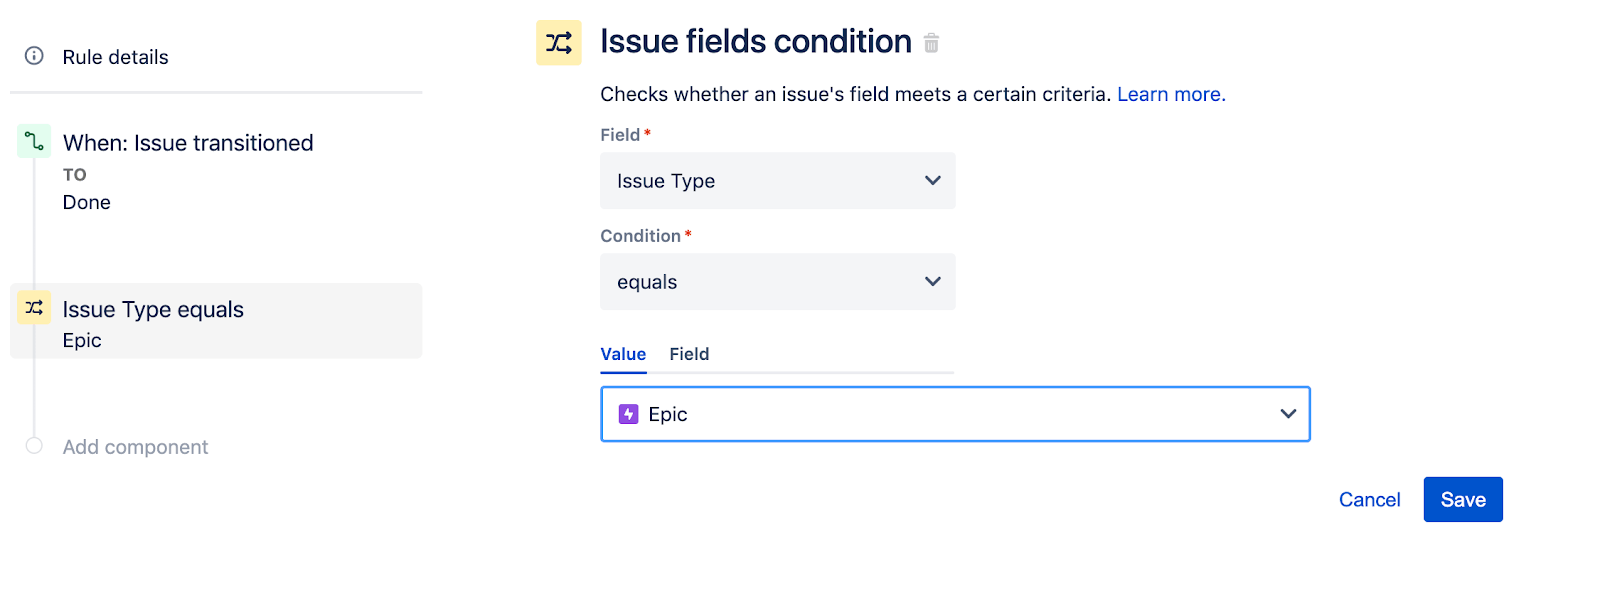 Issue fields condition configuration screen